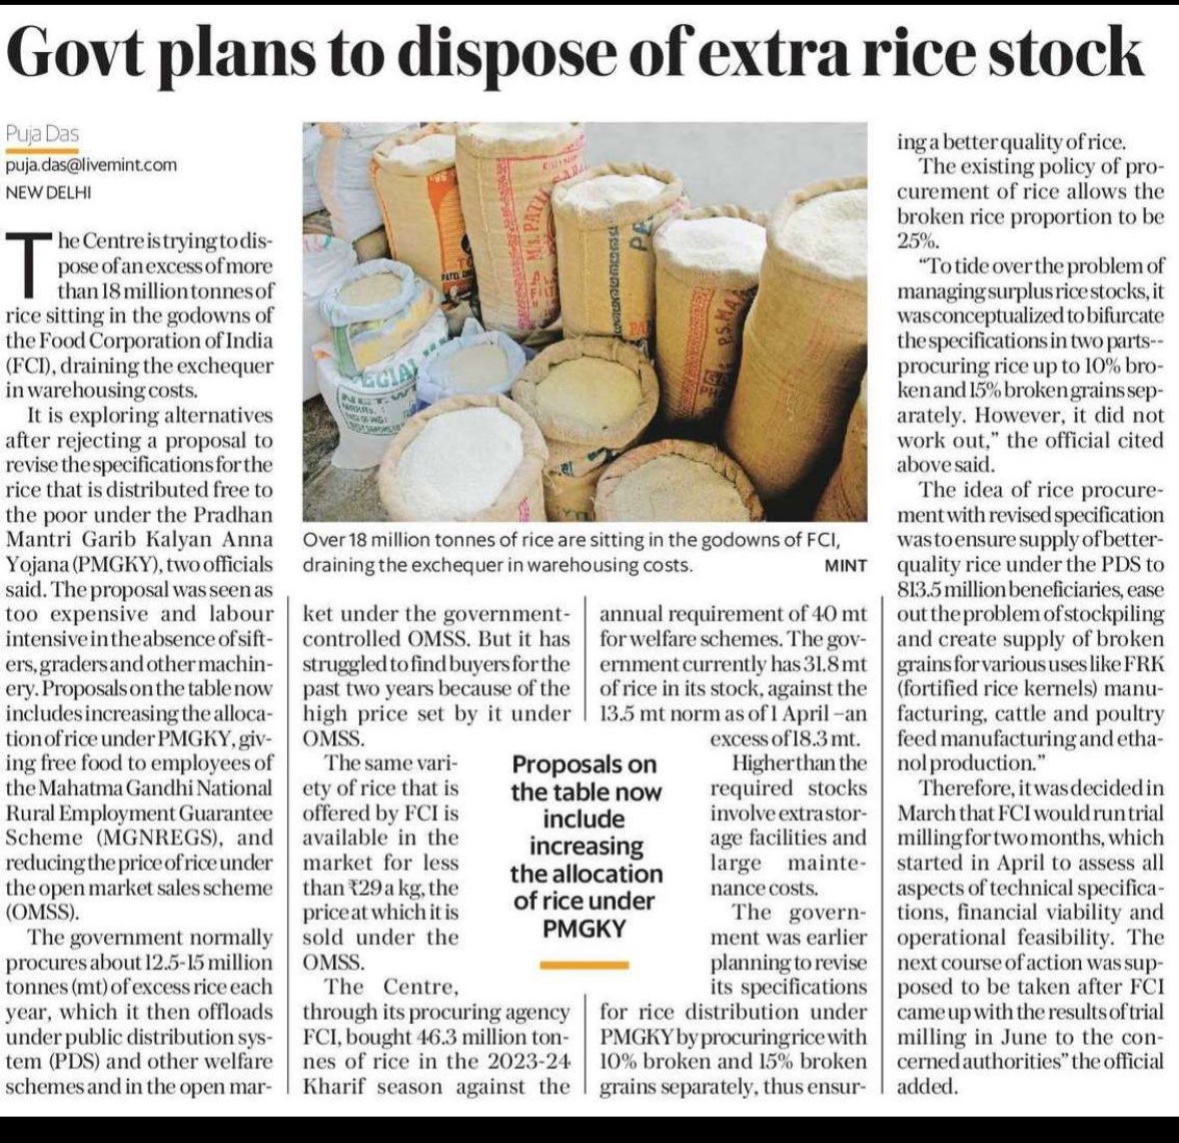 Sir, Why dispose of 18 million tonnes of rice while millions starve? Is your party afraid that our guarantee schemes benefiting all sections of society will reveal who truly cares for the people? @narendramodi Denying rice to Karnataka for Anna Bhagya Scheme, yet you folks